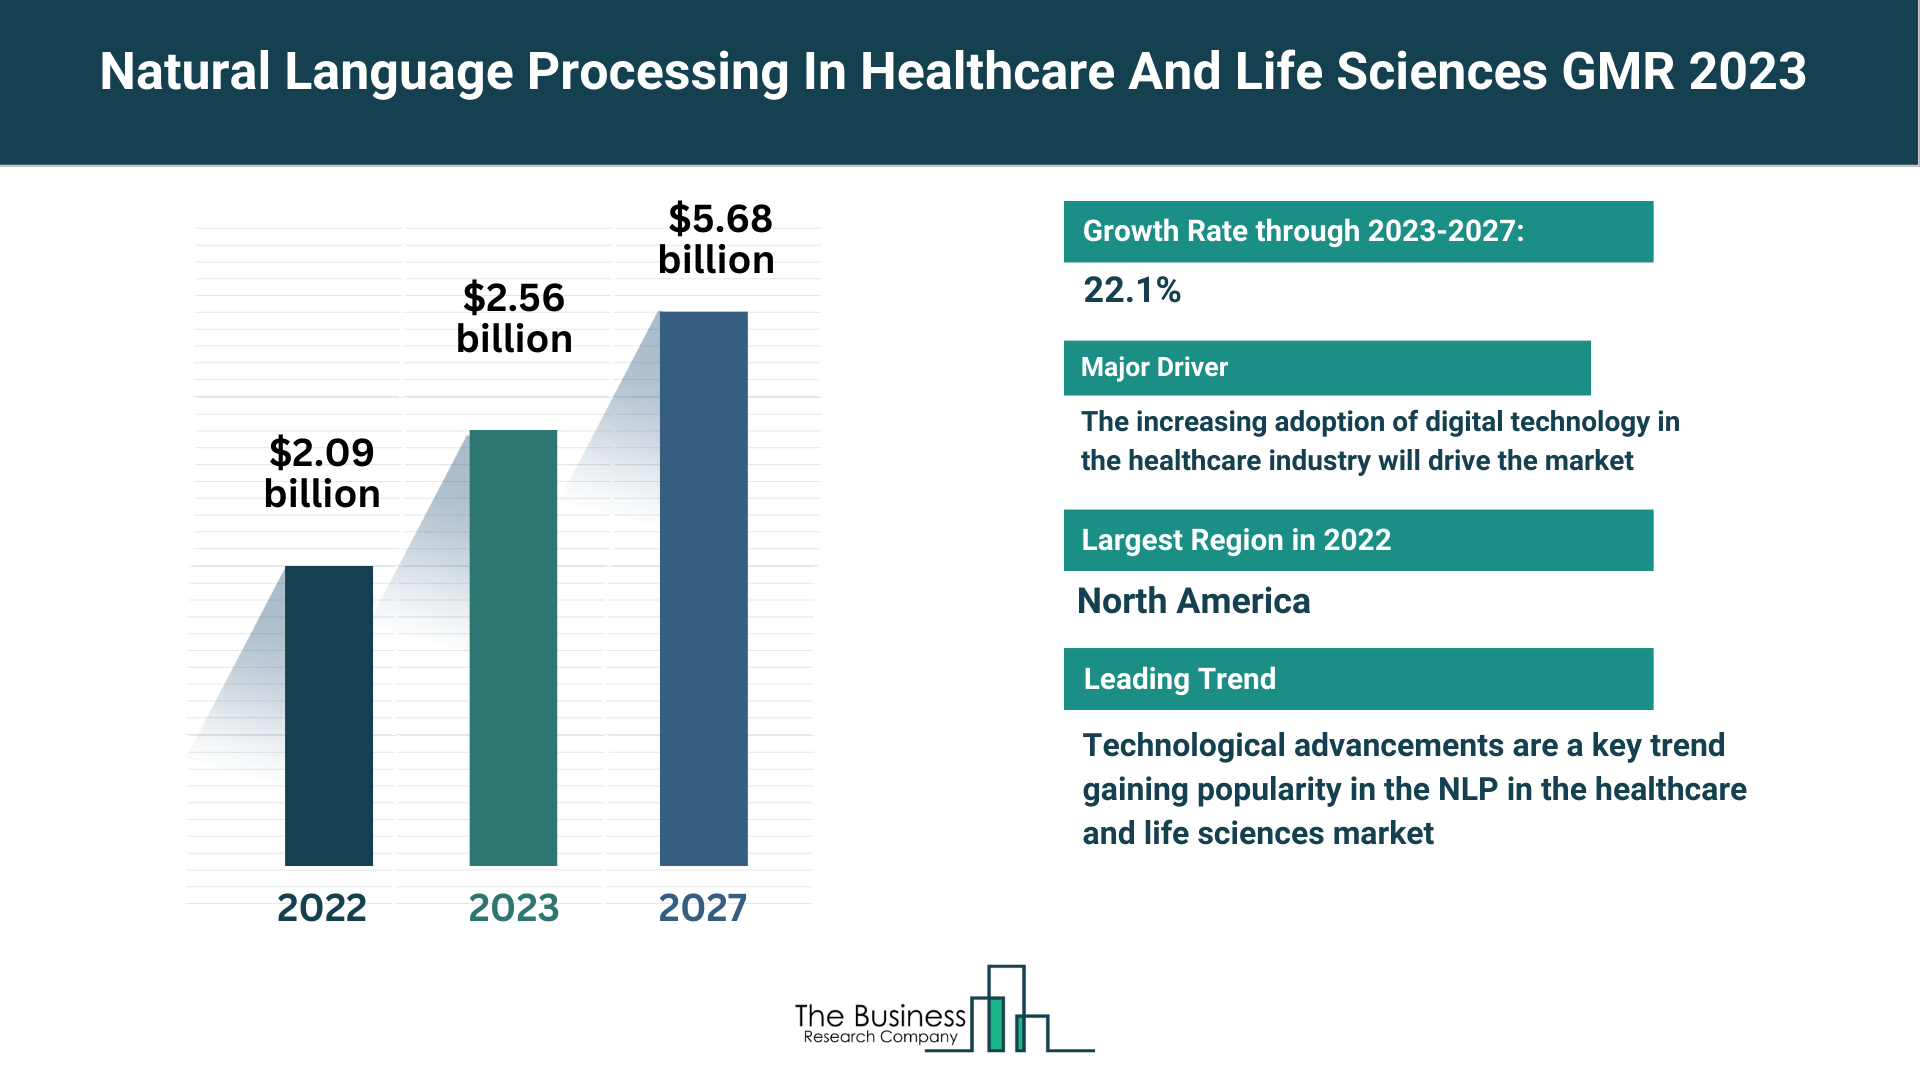 Global Natural Language Processing (NLP) In Healthcare And Life Sciences Market